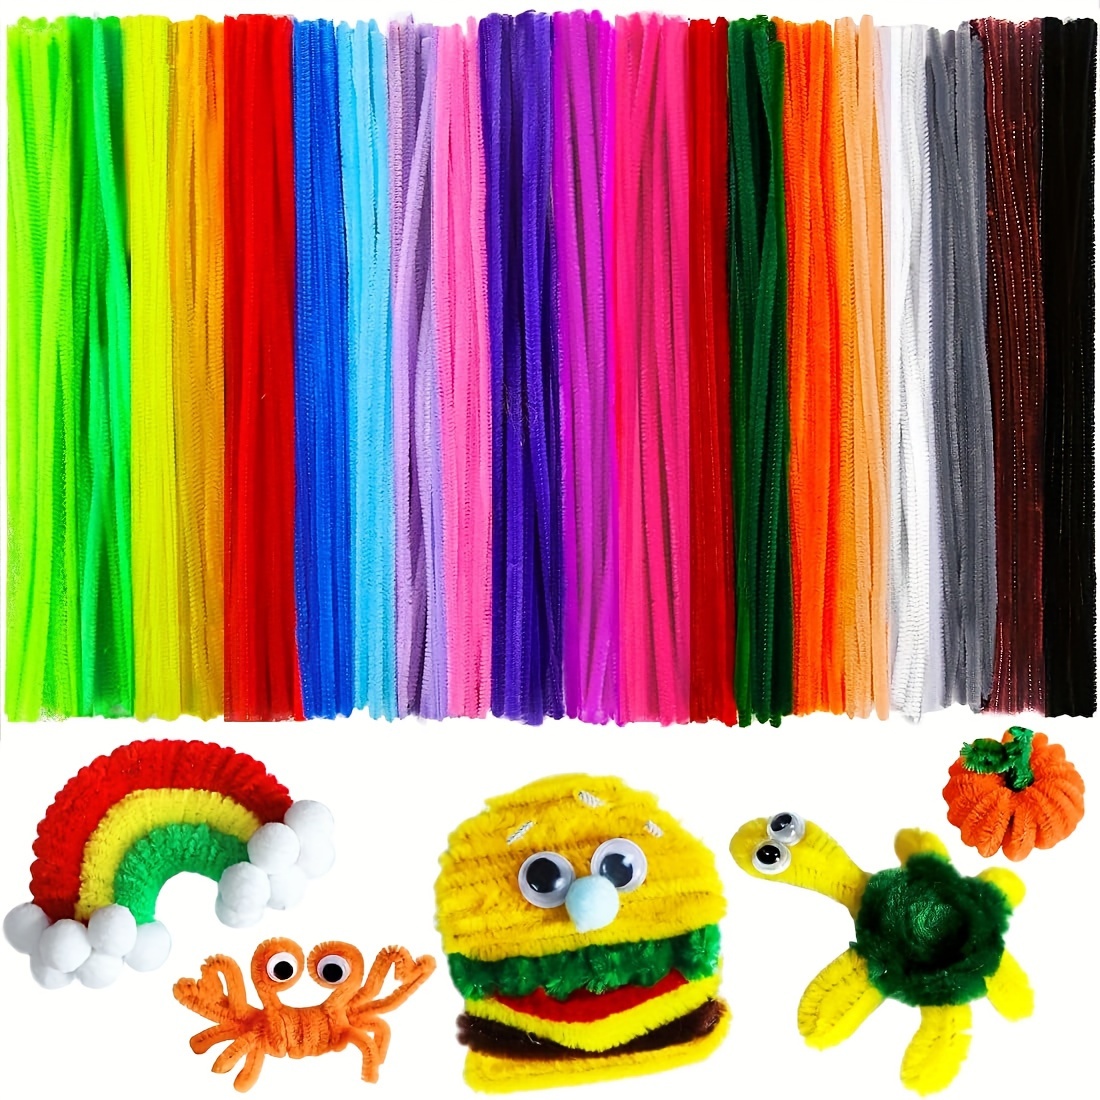  400 PCS Pipe Cleaners Craft Supplies, Arts and Crafts Kit for  Kids - 4 Color Mixing Series Kids DIY Art Supplies, Pipe Cleaner Chenille  Stems, Multi-Color Pipe Cleaners Bulk : Arts